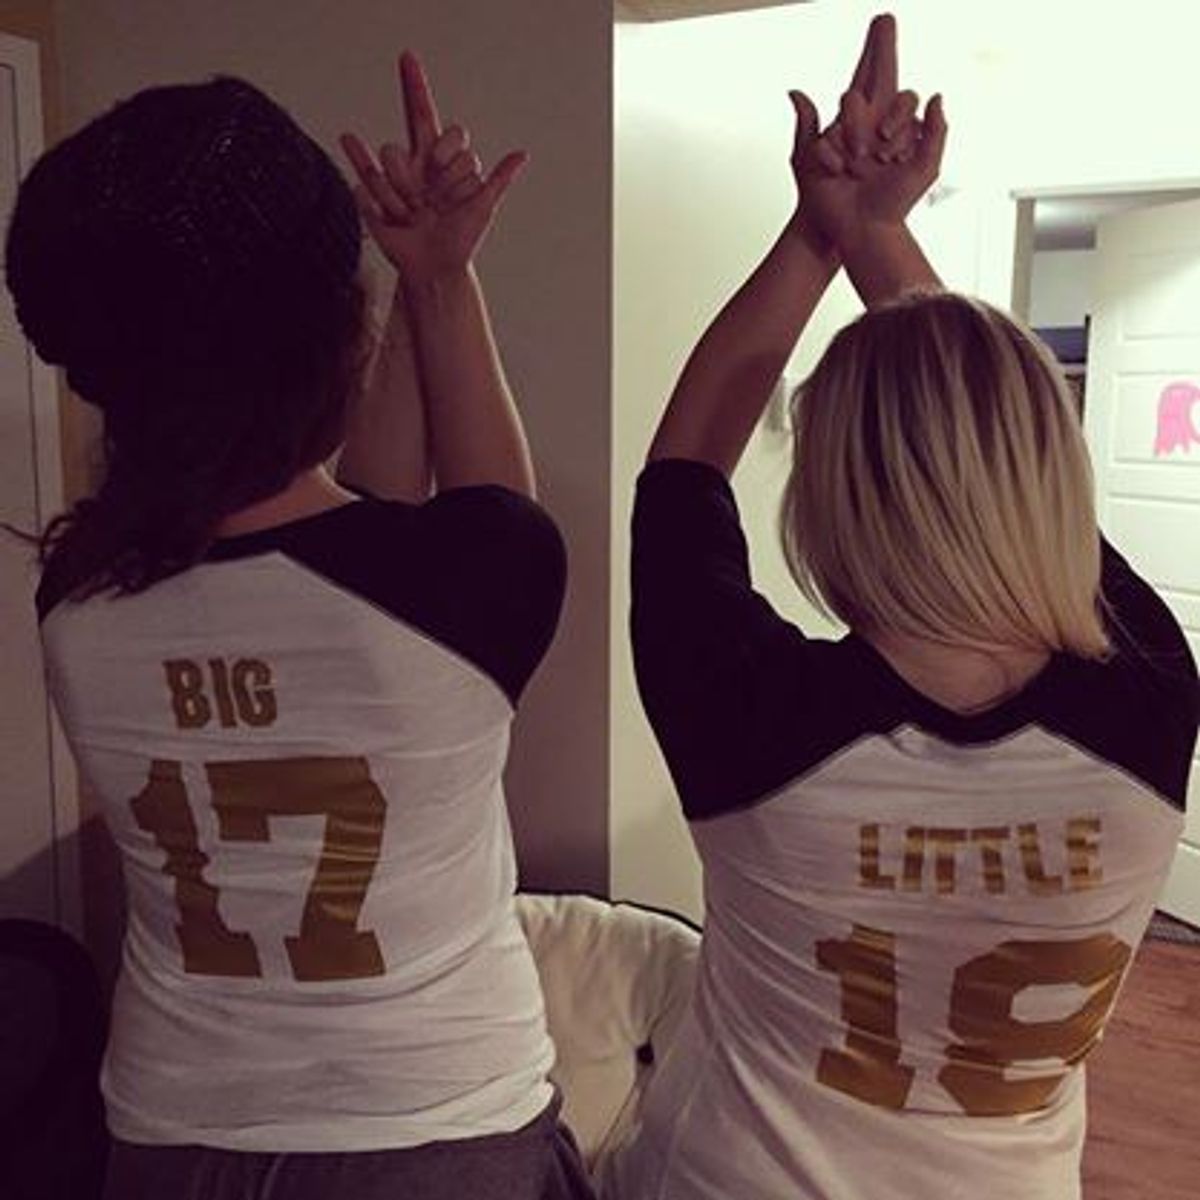 10 Signs Your Big Is Your Second Mom